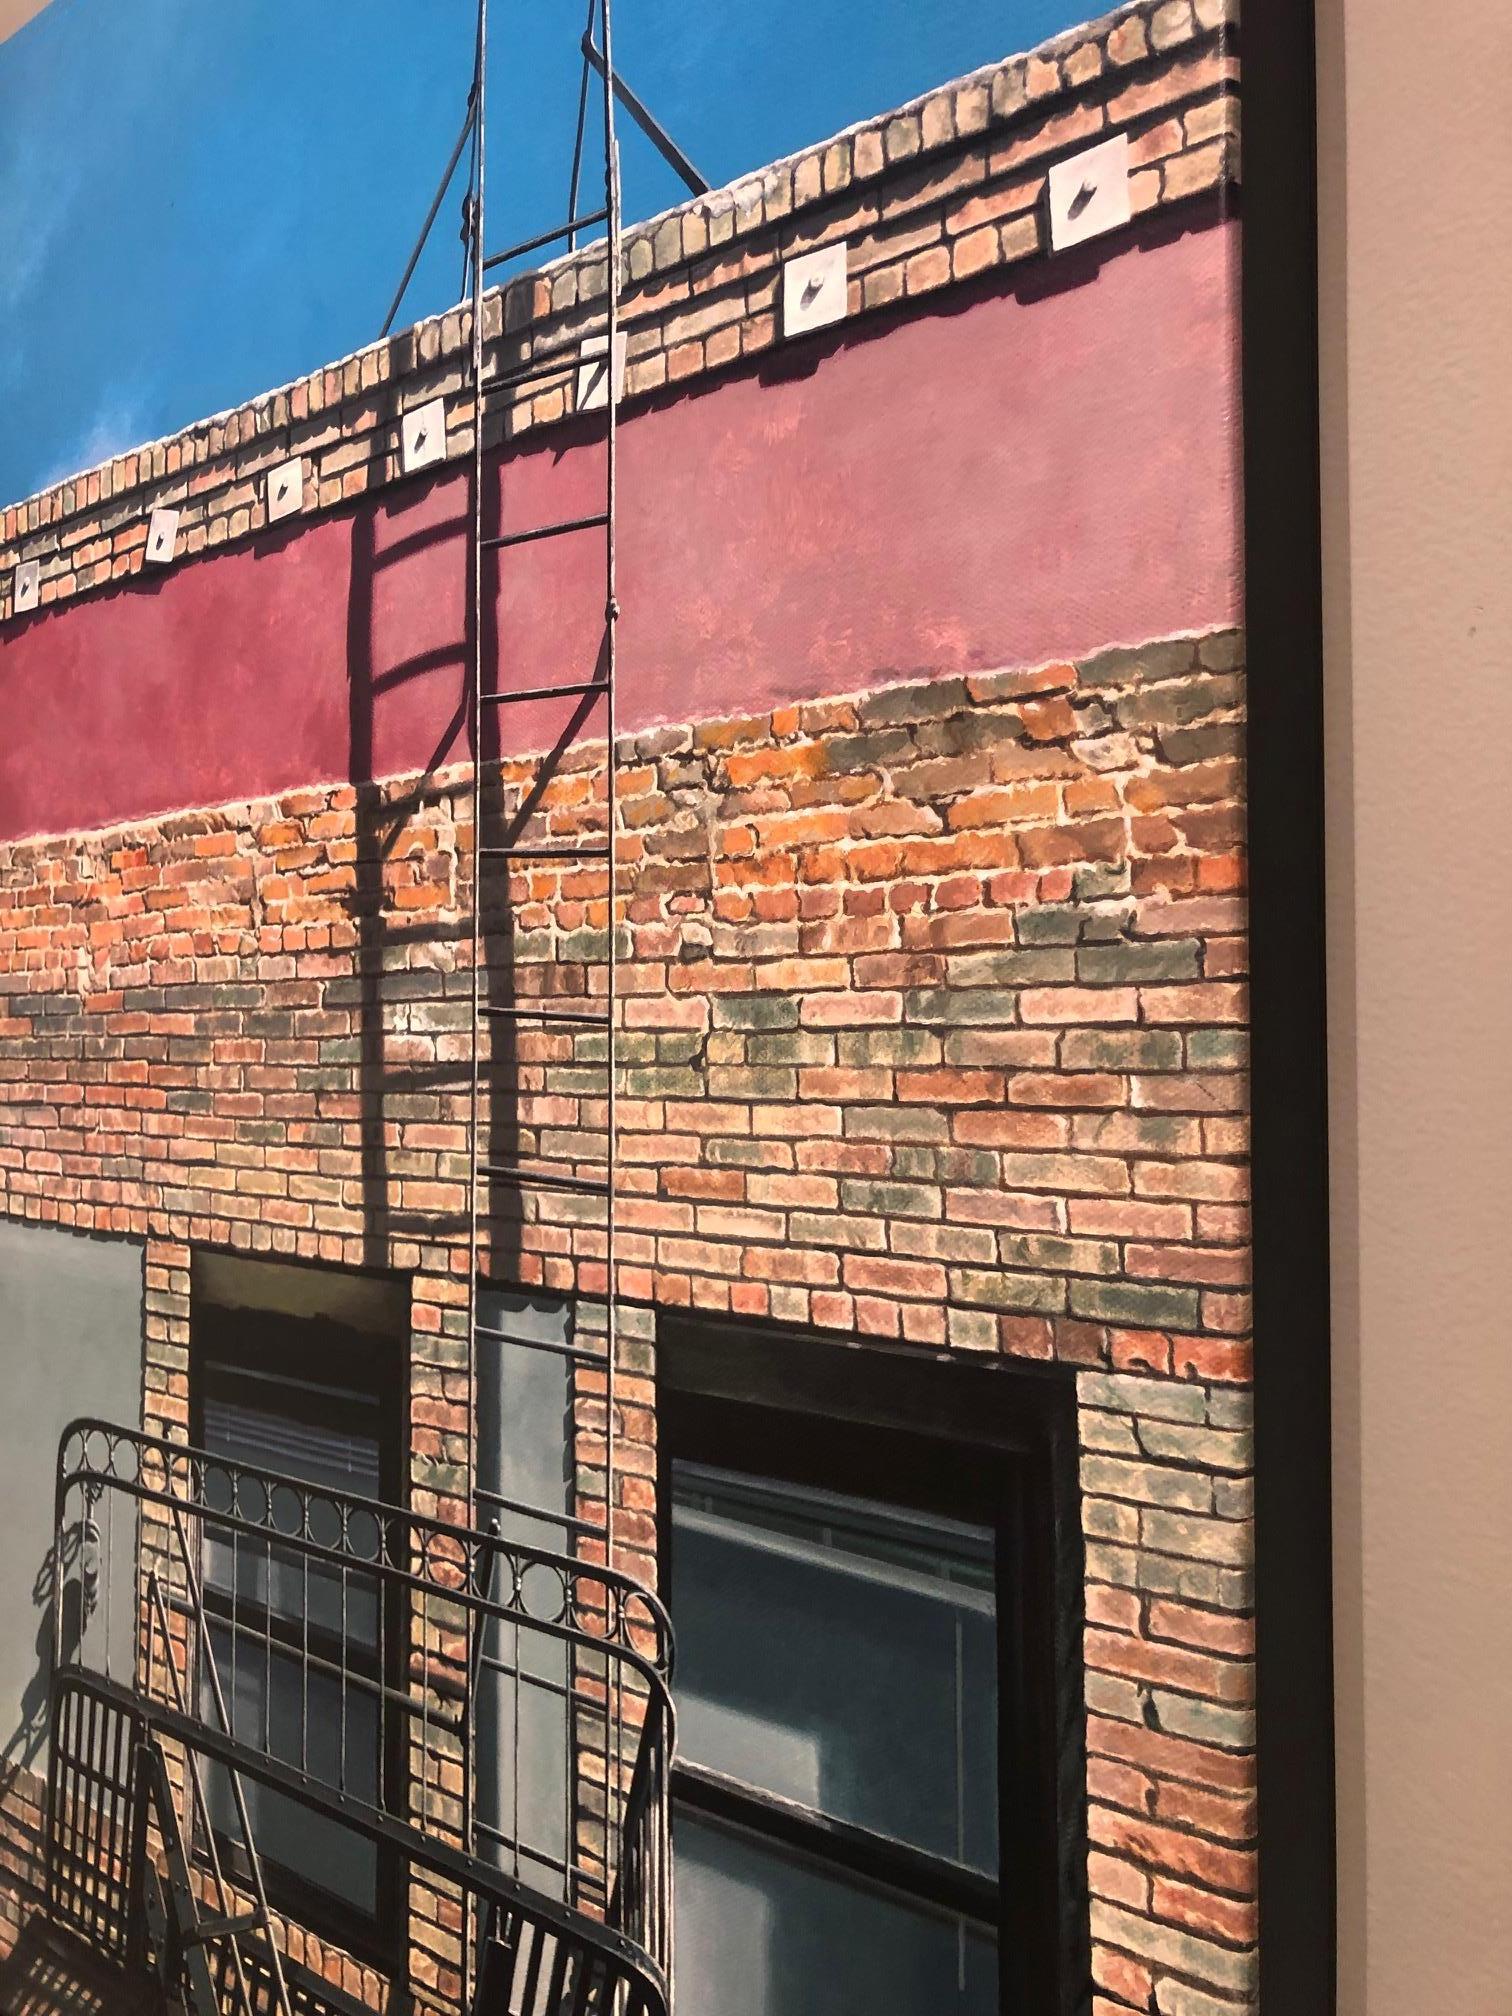 'Scaling the Heights' in mainly blue, jade green, red and grey, by one of California’s premier realist arrtists', Lynette Cook, who captures urban landscapes of San Francisco’s Chinatown and other Bay Area regions. Her images — often gritty scenes